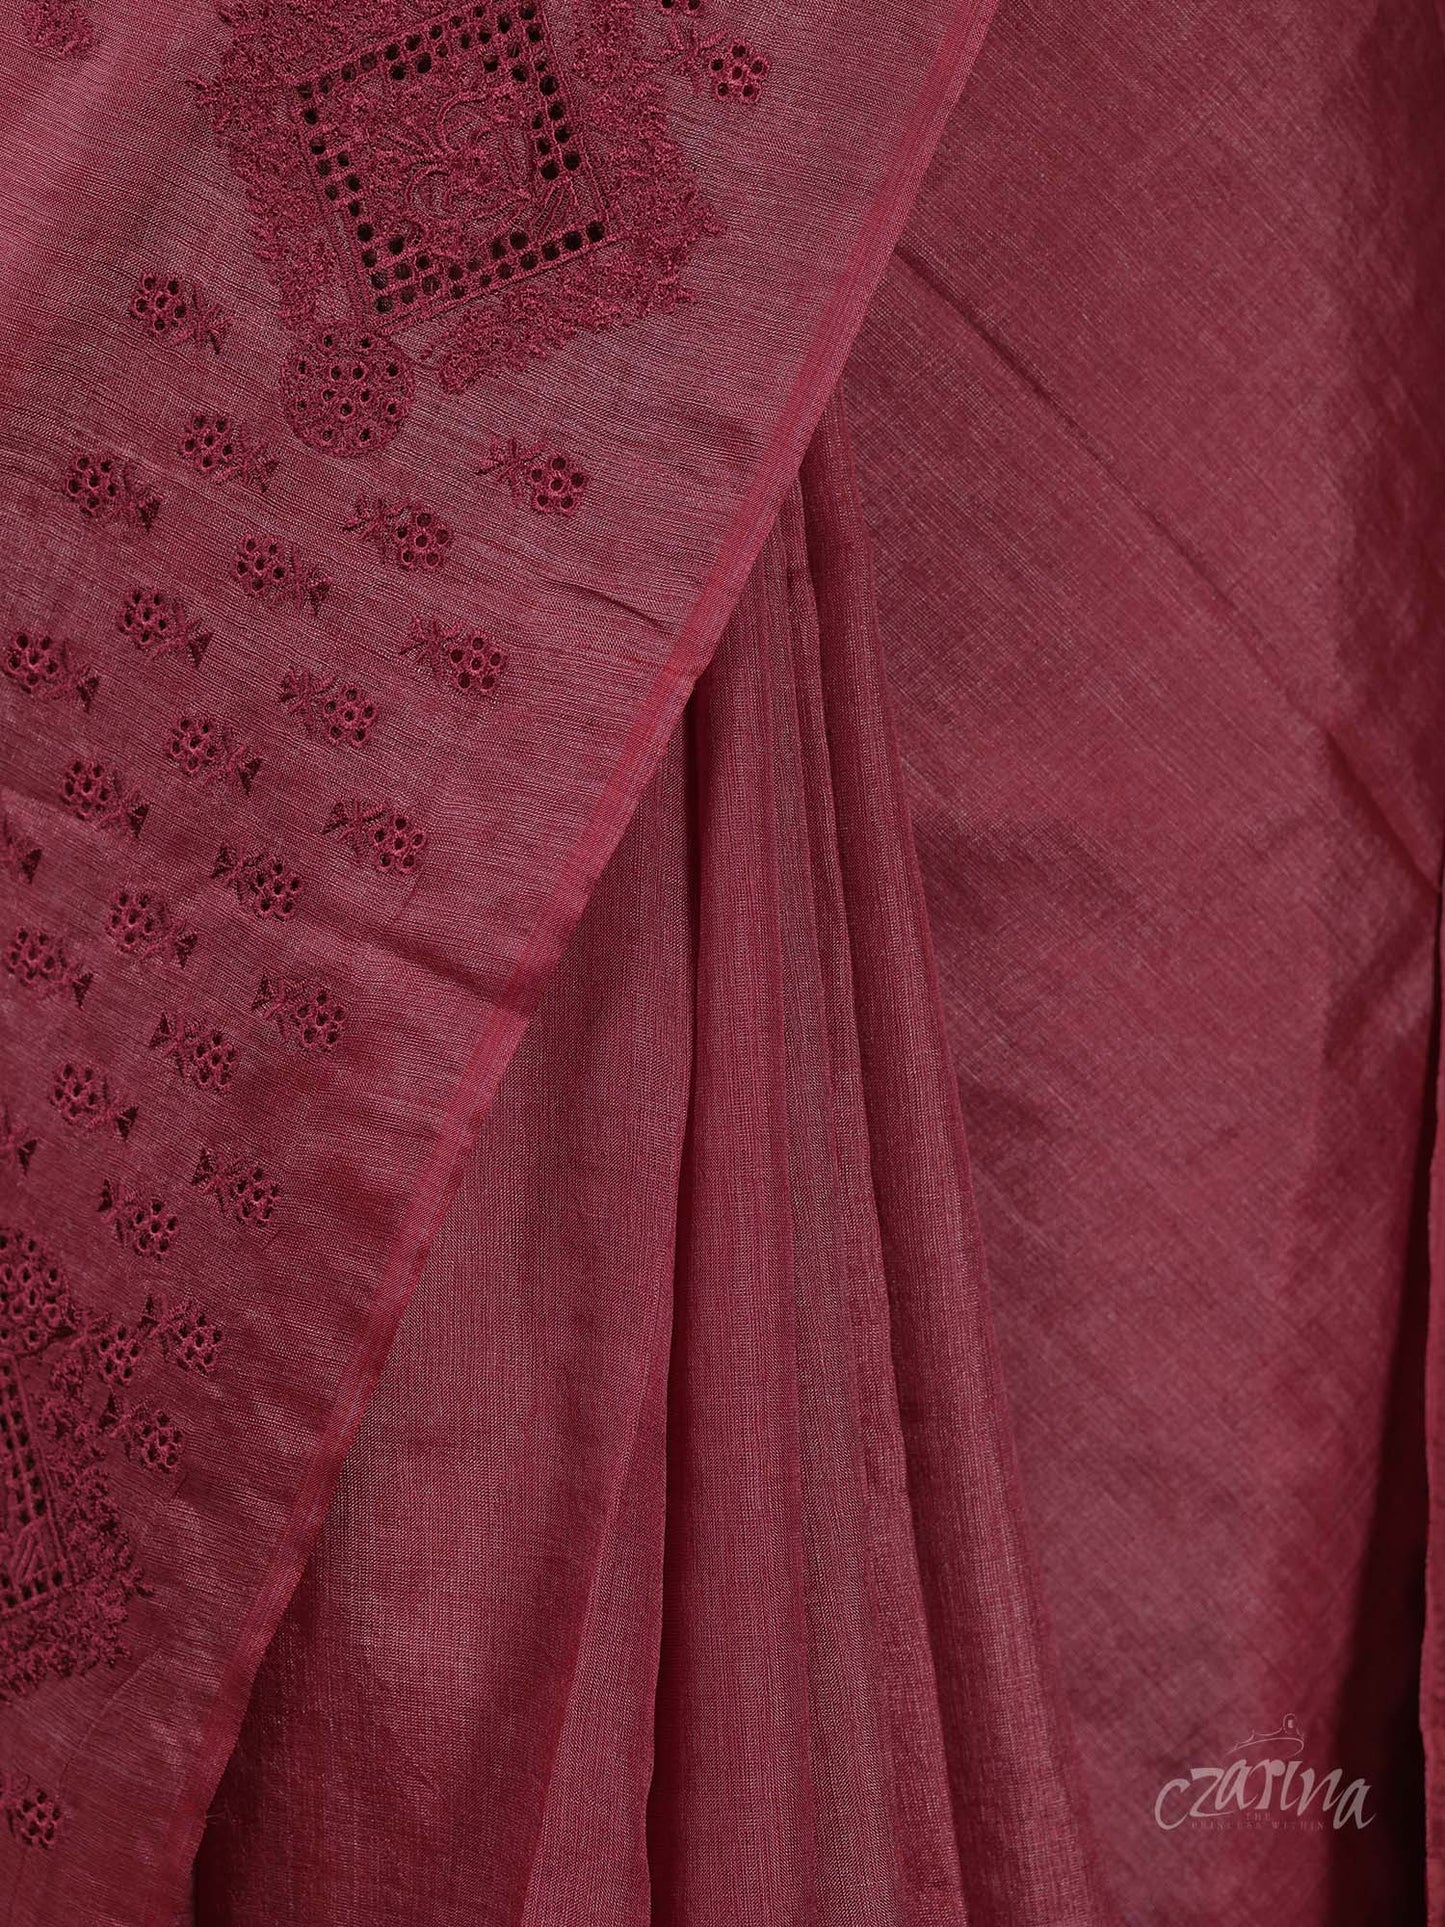 ONION PINK THREAD EMBROIDERY WITH CUT WORK TUSSAR SILK SAREE